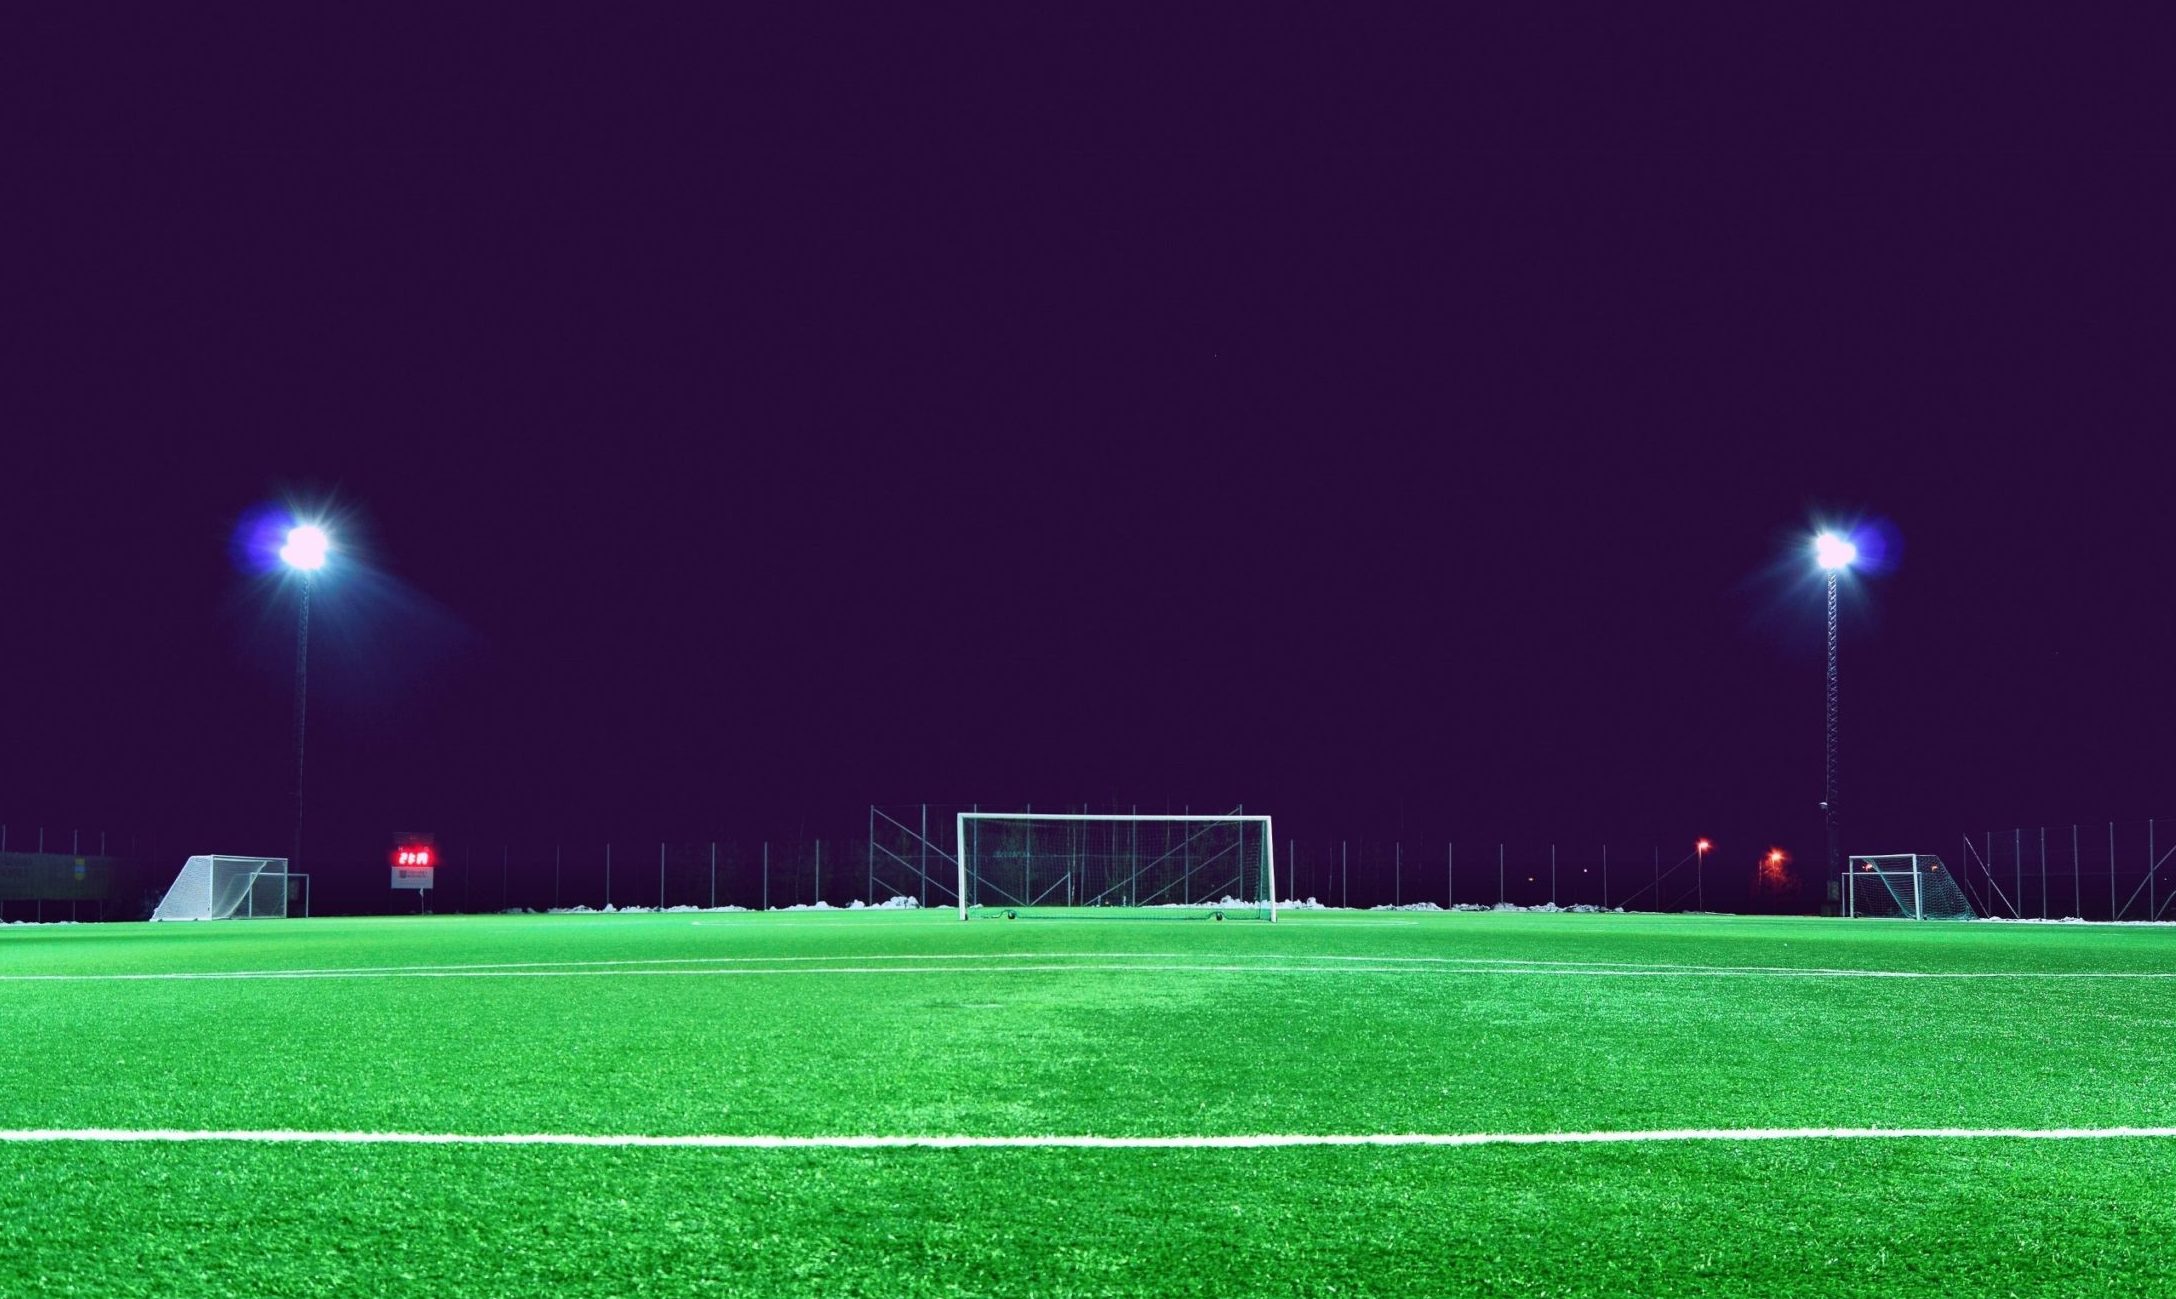 A football field in the evening